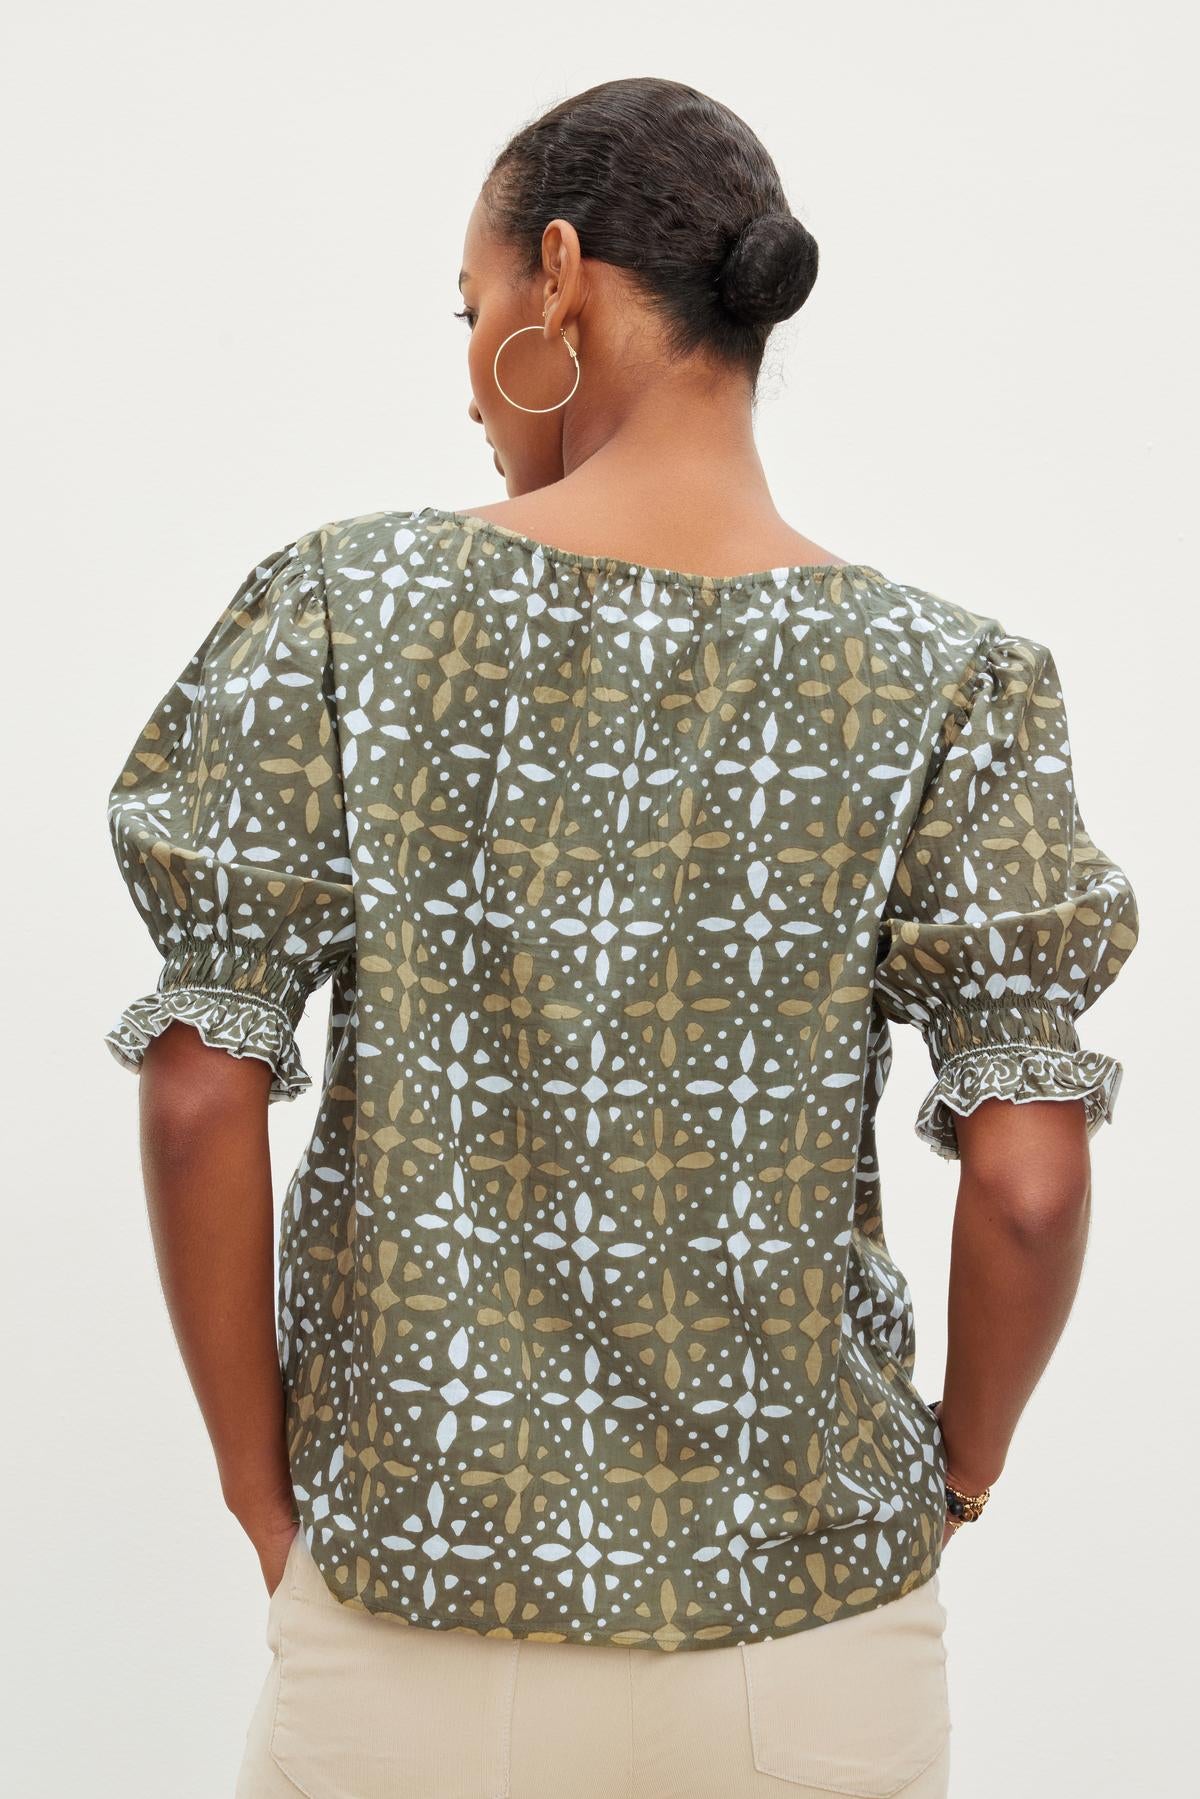 The back view of a woman wearing the Velvet by Graham & Spencer ALEX PRINTED BLOUSE.-26799971762369